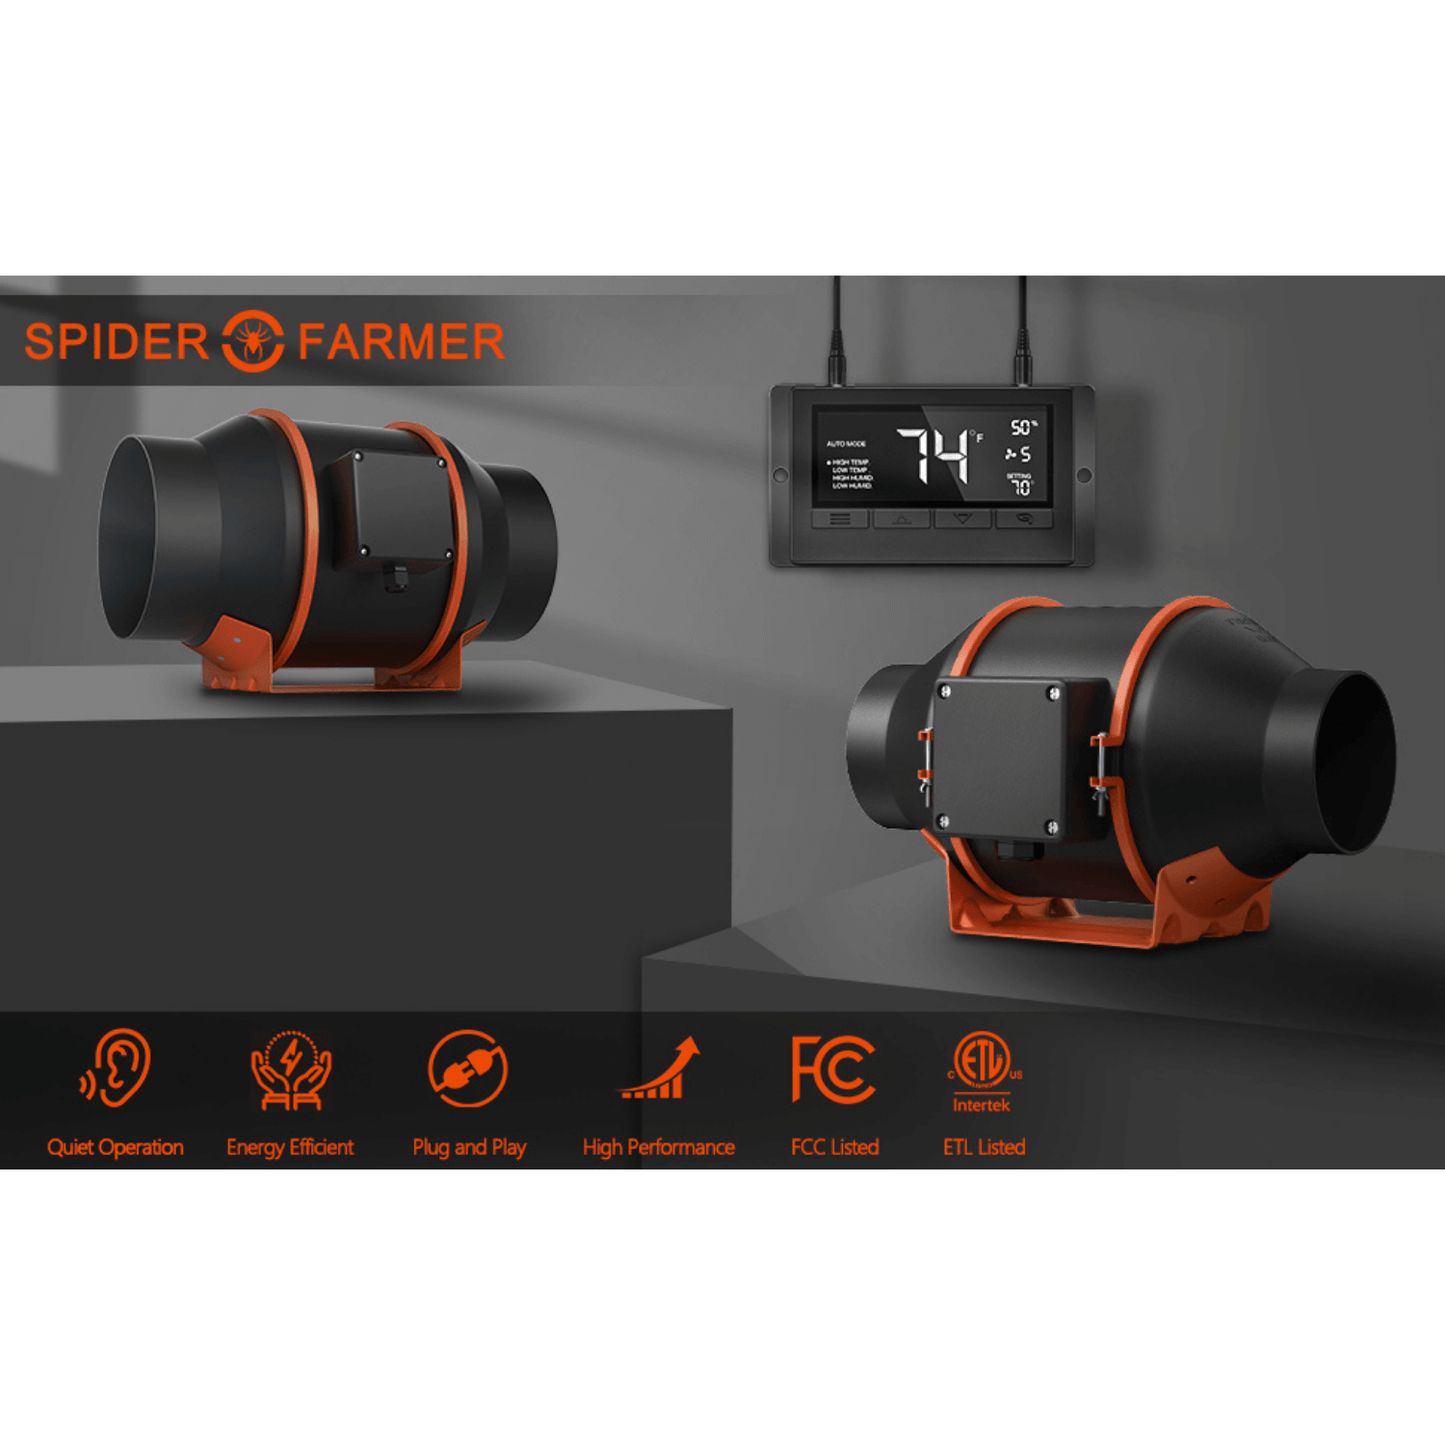 Spider Farmer 4" Inline Duct Fan with Temperature and Humidity Controller SF-4Inlinefan-CP Ventilation 6973280375493